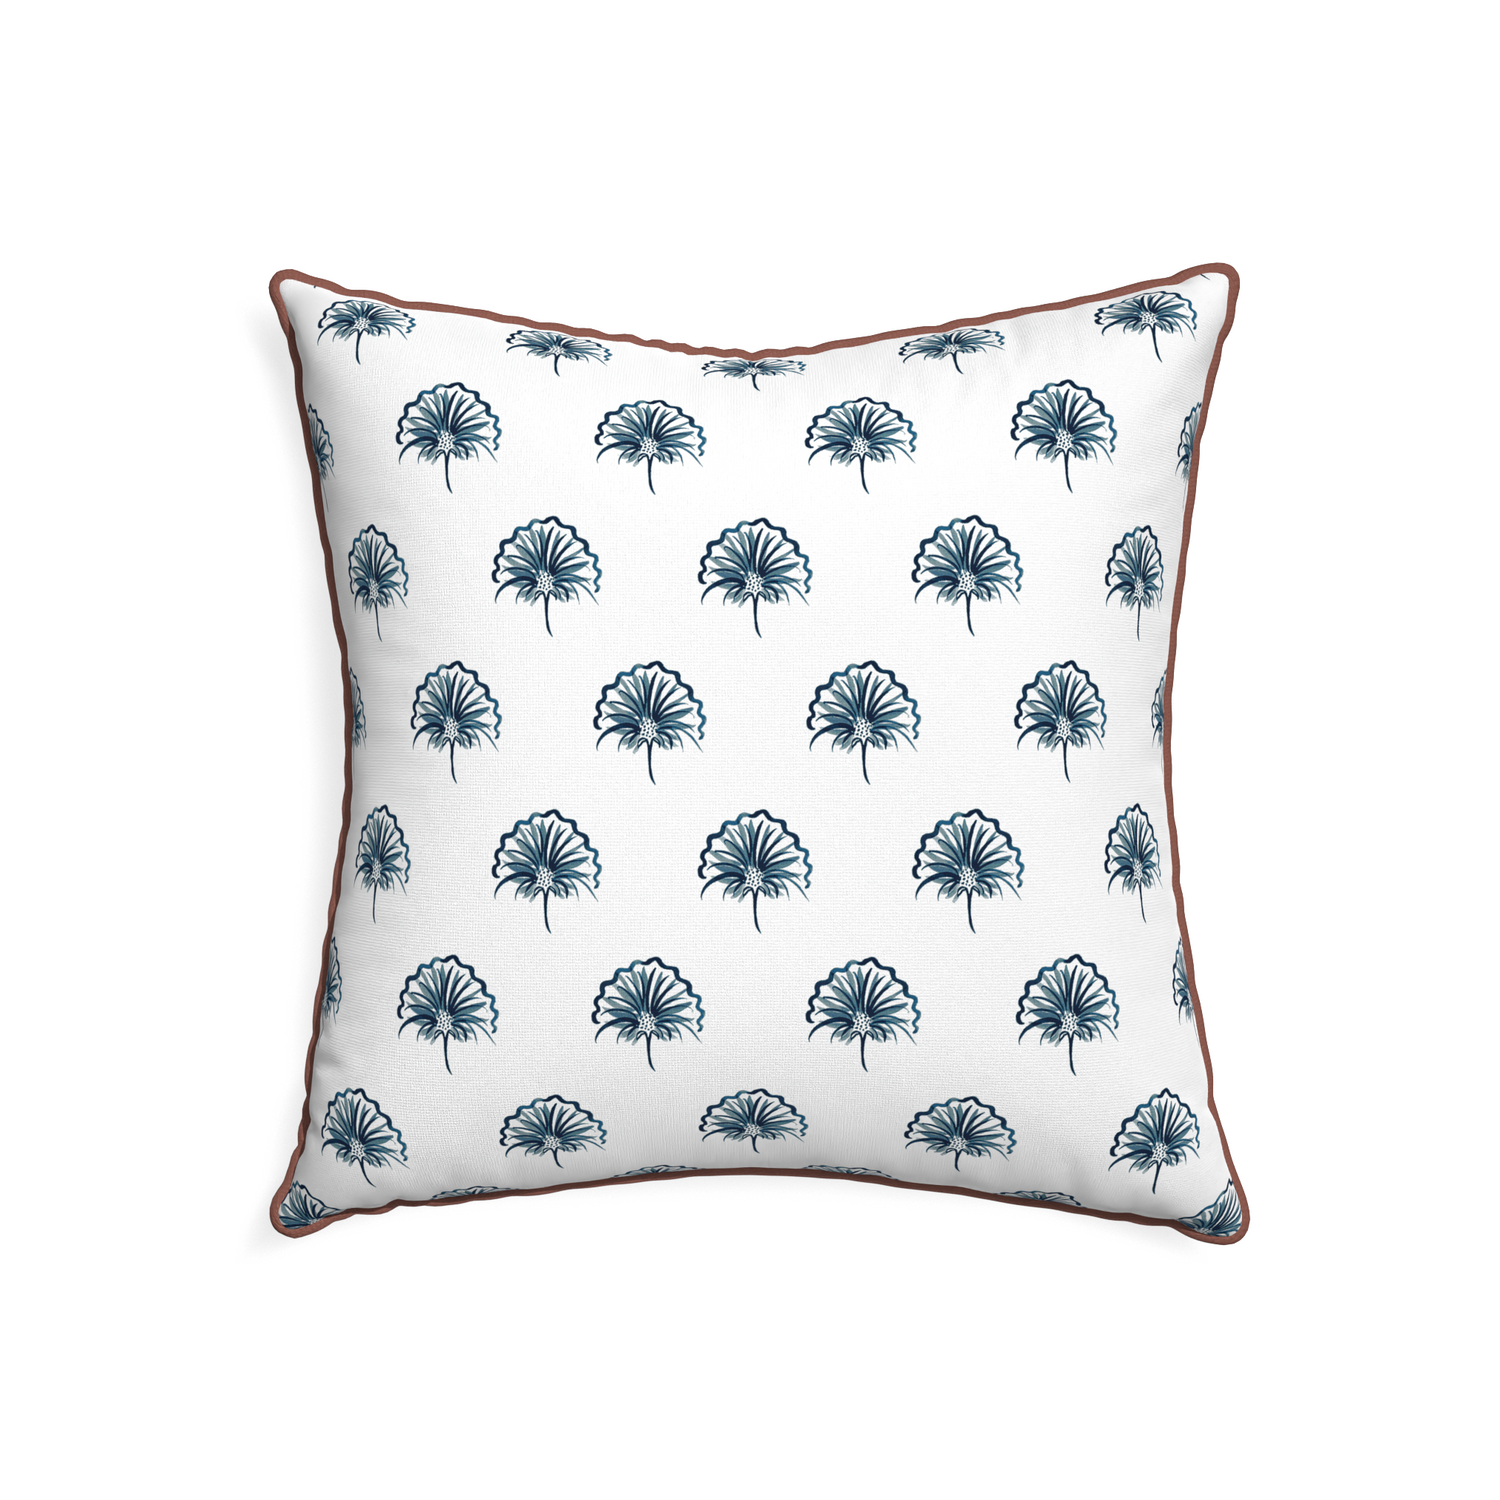 22-square penelope midnight custom floral navypillow with w piping on white background